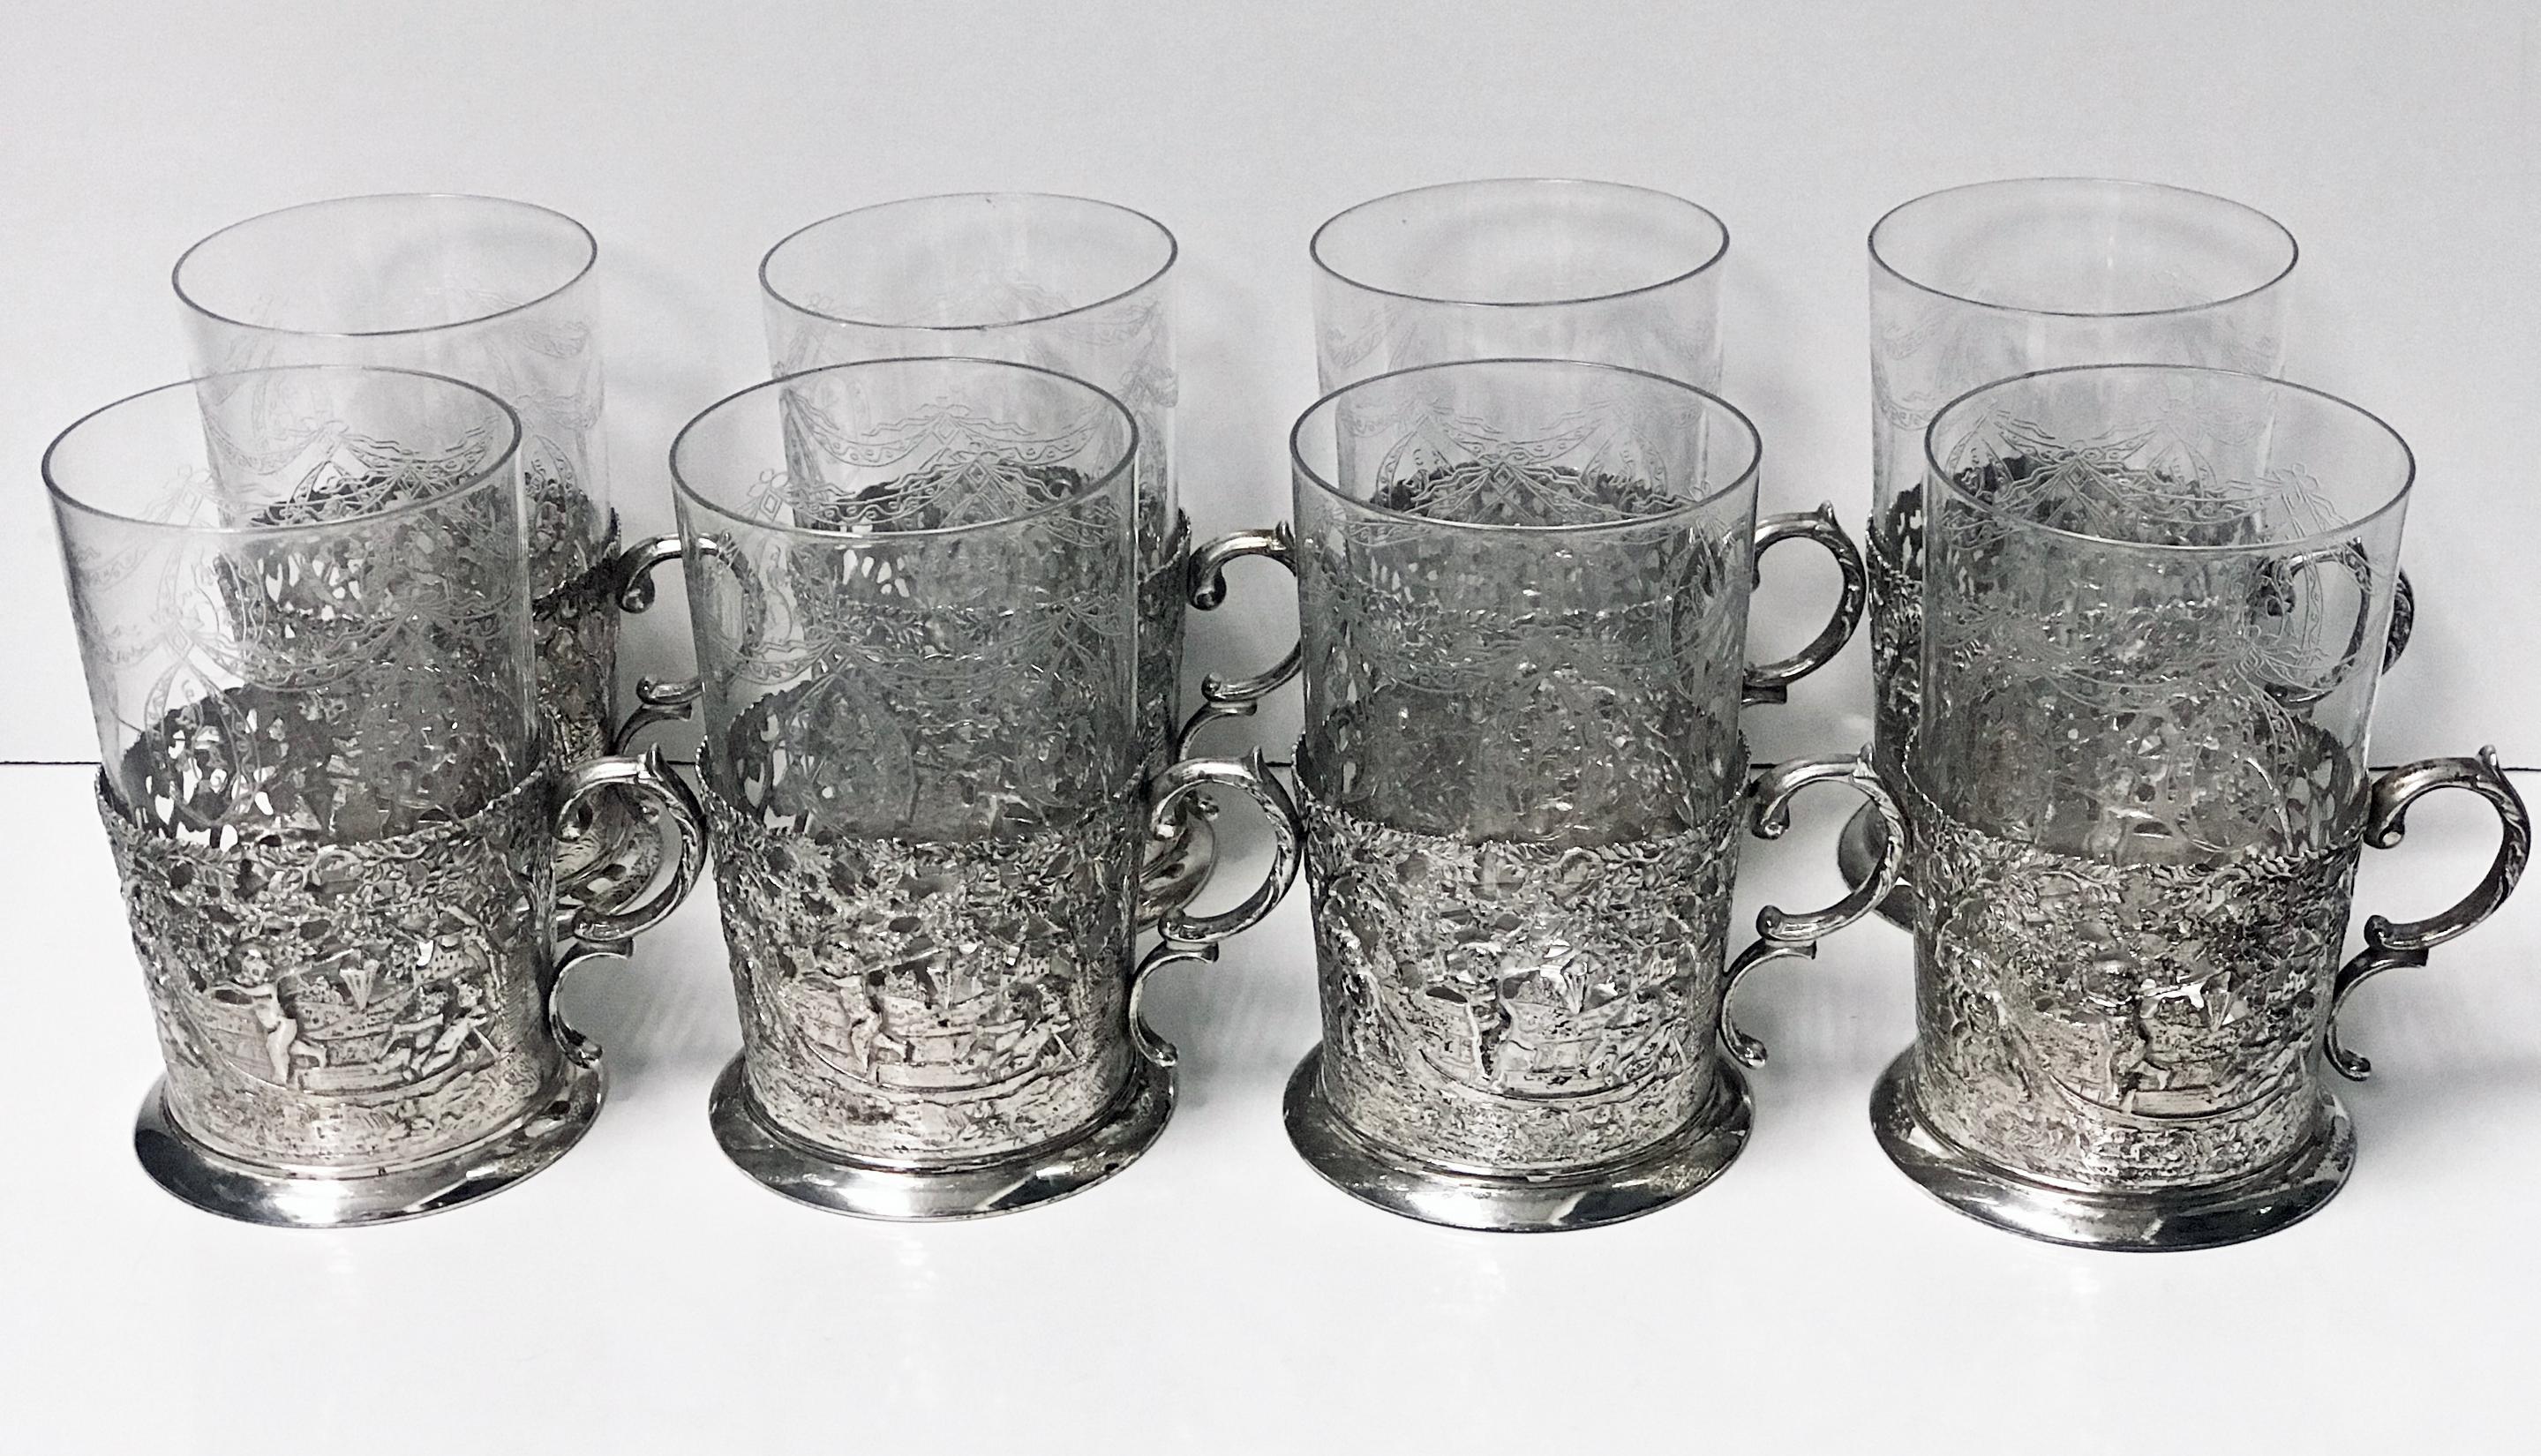 Set of 8 silver glass tea holders, Germany, circa 1900. Each of 0.935 standard silver, depicting beautifully scenes of cherubs, putti and angels amidst foliage. Each glass insert with festoon engraved foliate decoration. Measures: Height 4.50